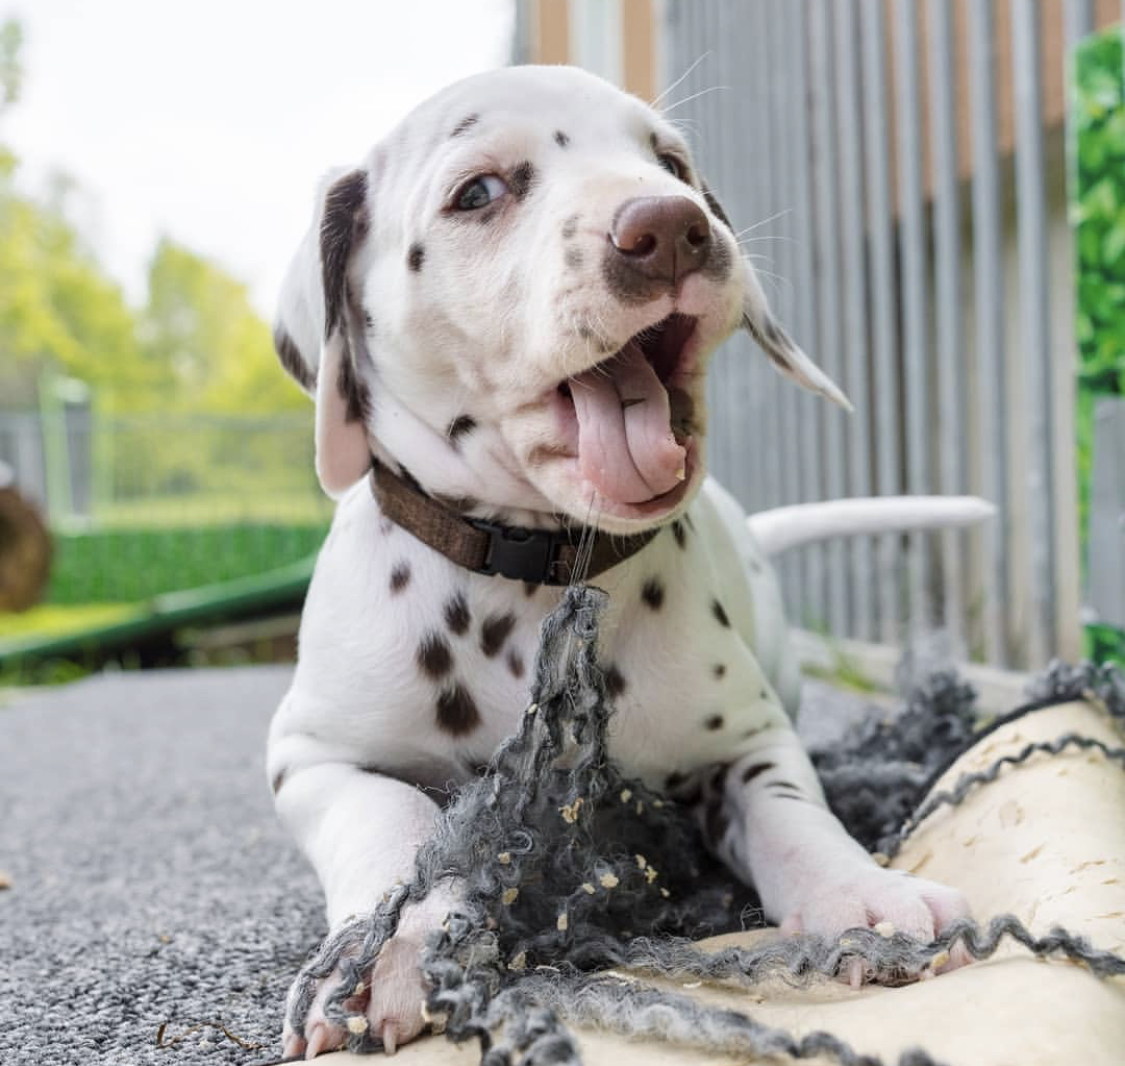 A Dalmatian puppy lying on the pavement while playing with something